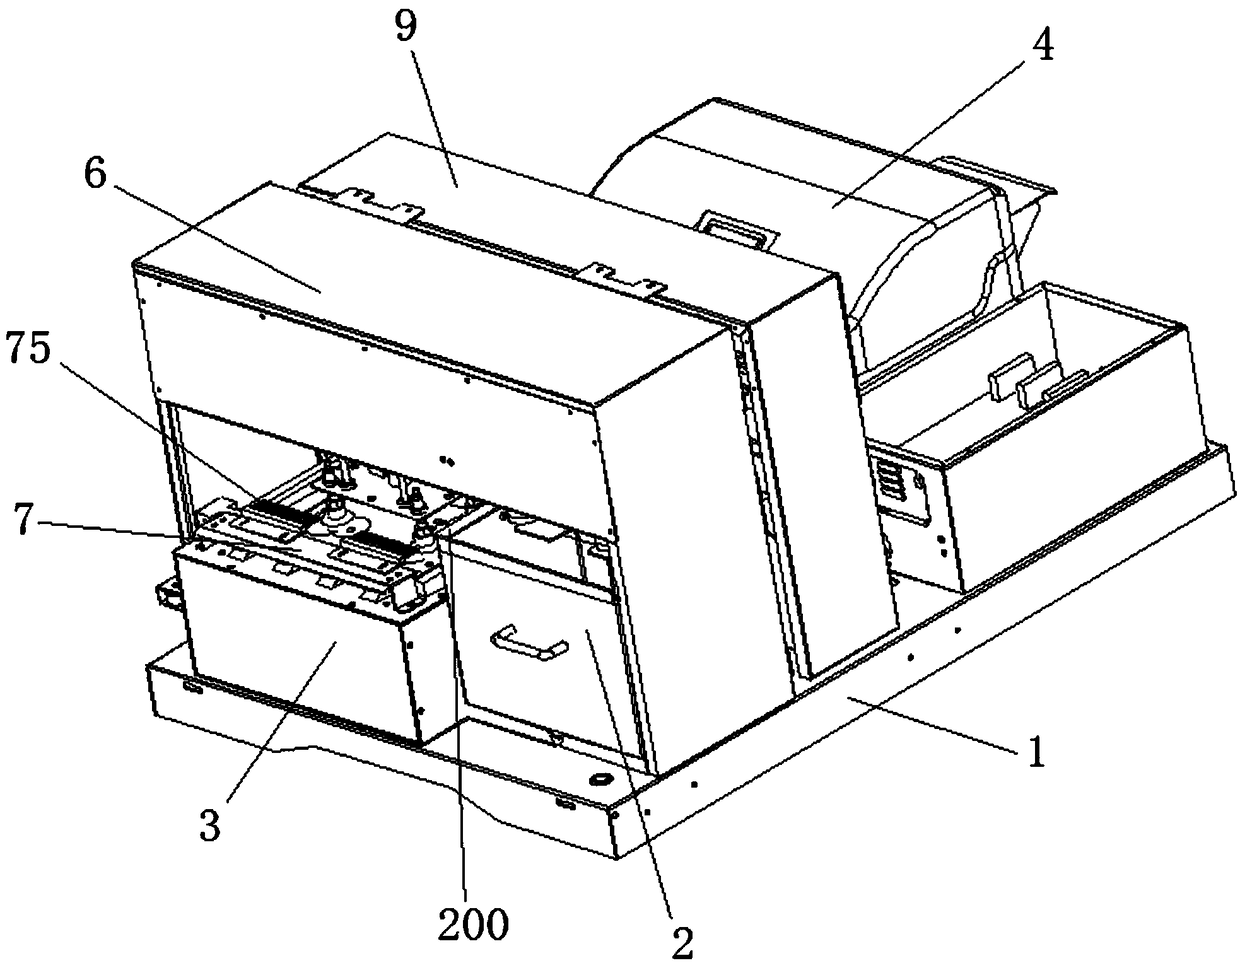 Automated certificate making device